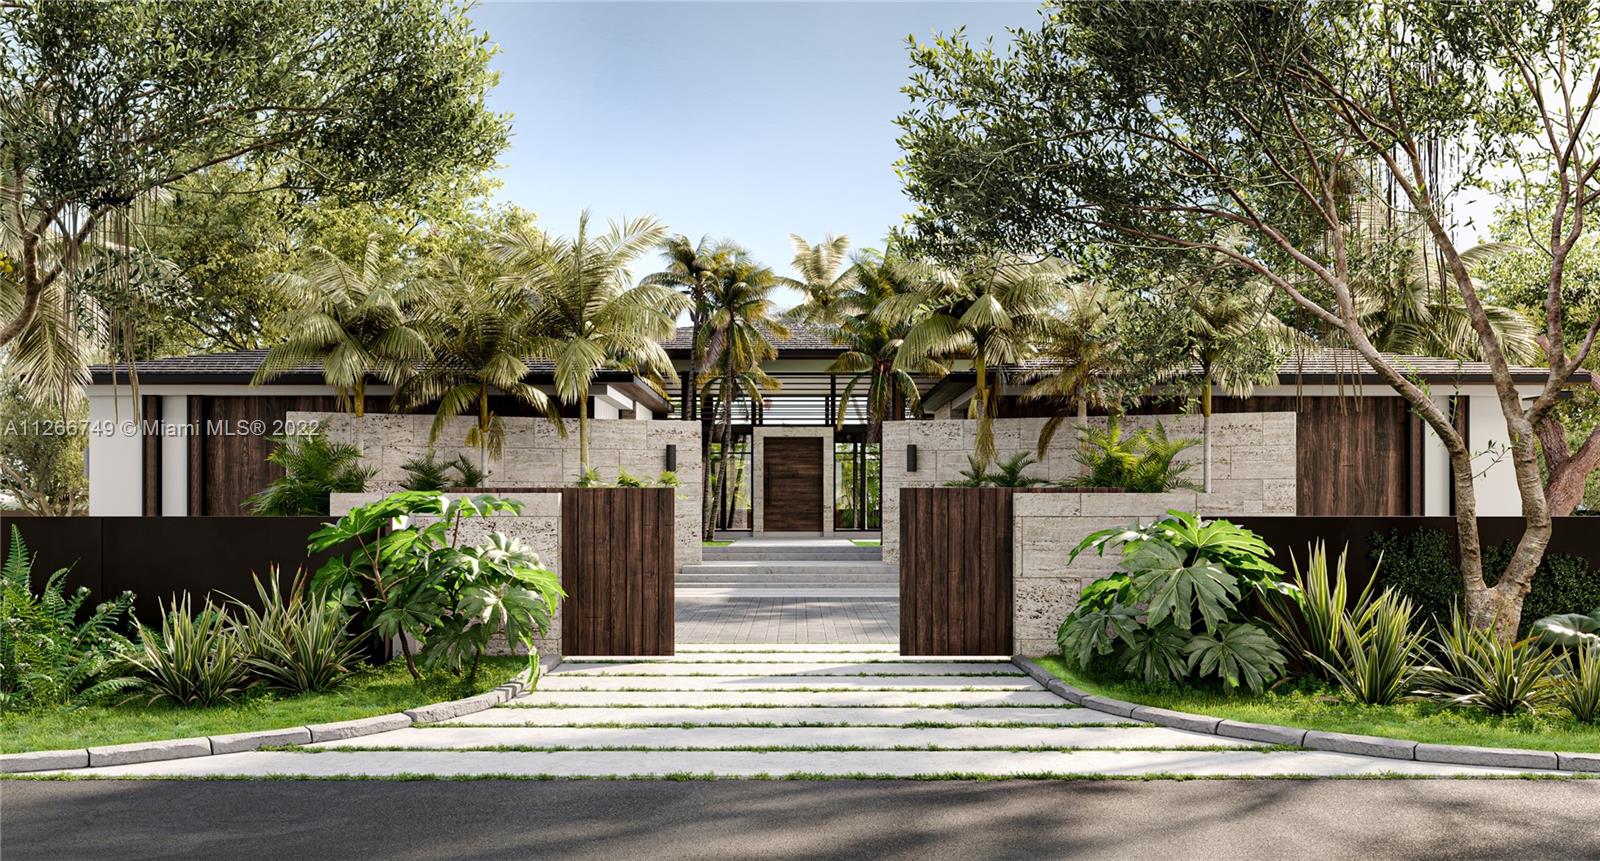 A brand new, spectacular modern-tropical oasis estate designed and built by by the award-winning MAST Architecture & Development. Located in the heart of the much-desired neighborhood of North Pinecrest. Projected to be completed in Fall 2023. This dream home will be equipped with a gated private entry, security cameras, smart-home ready, Office, Media room which can be converted to the 7th bedroom, laundry Room, walk-in wine cellar and Bar with Wine refrigerator and beverage center. a 2 bed/2bath detached guest house with gym room featuring a steam shower. The stunning outdoor patio will feature a heated saltwater pool and fully-outfitted summer kitchen. Generator &/or solar-ready. 3-car garage.